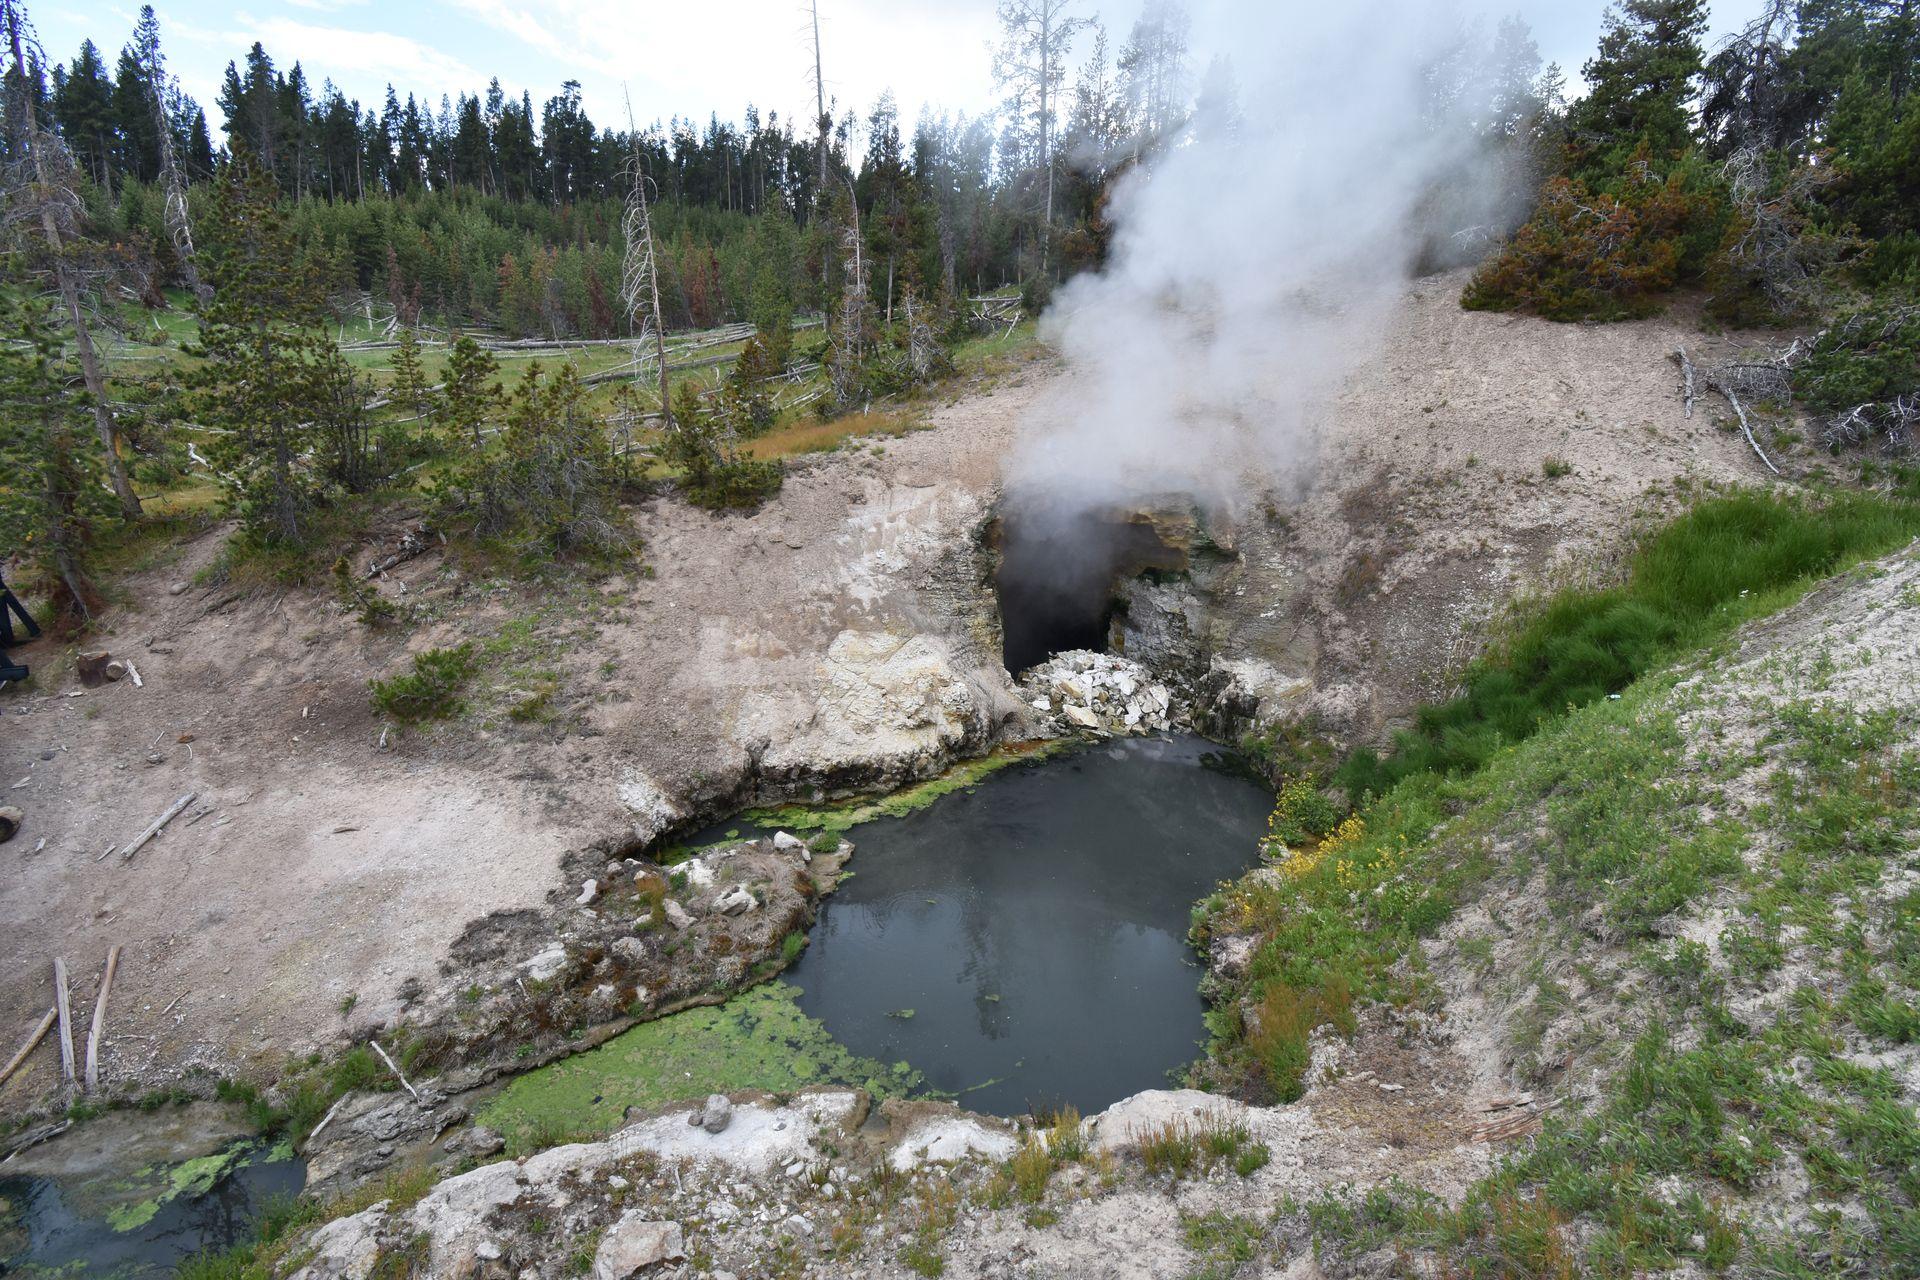 Steam rising from a little cave next to a hot spring at the Mud Volcanoes area.